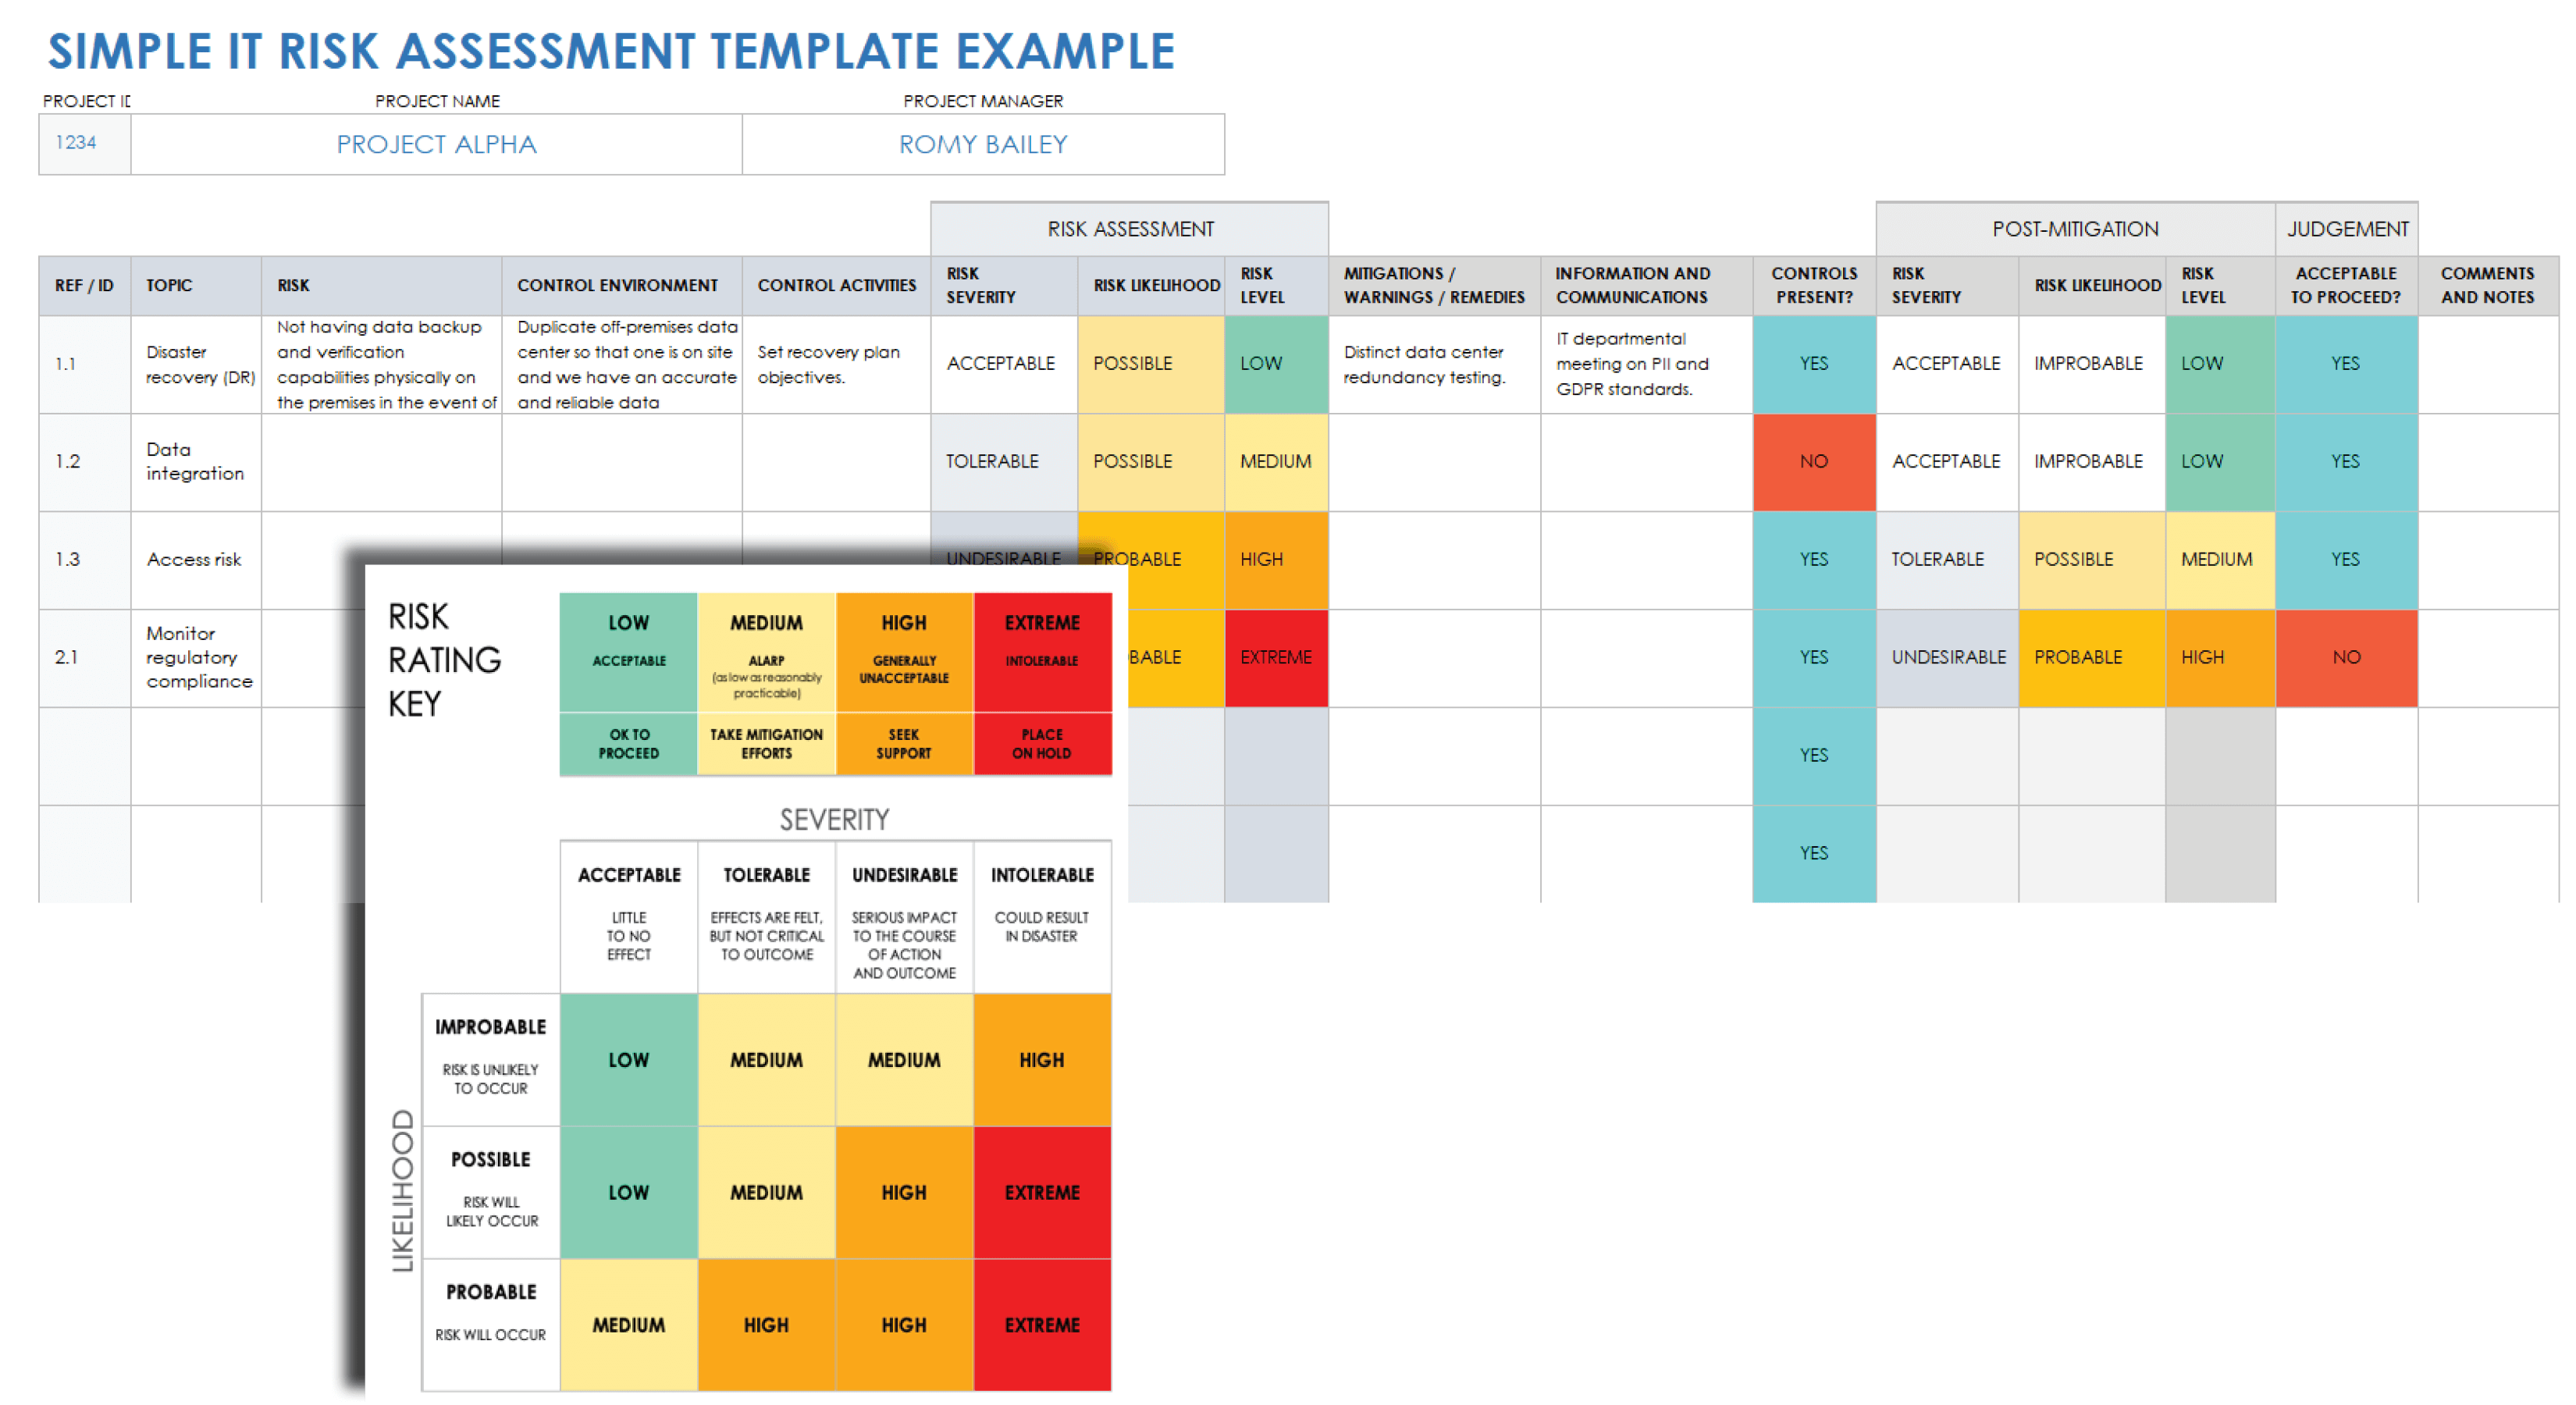 Example Simple IT Risk Assessment Template